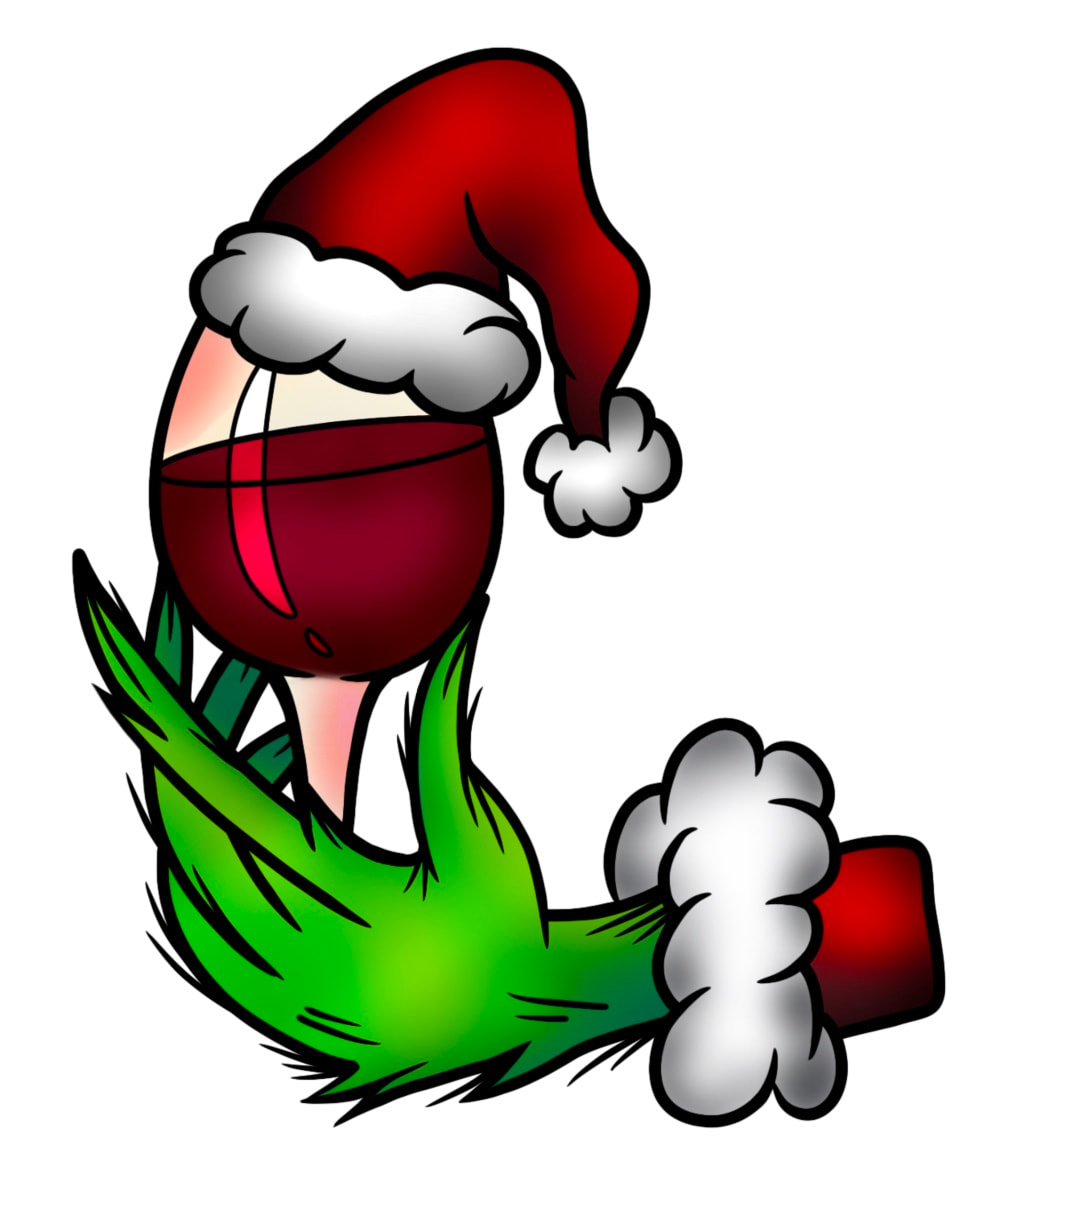 Grinch hand holding a wine glass with a Santa hat.